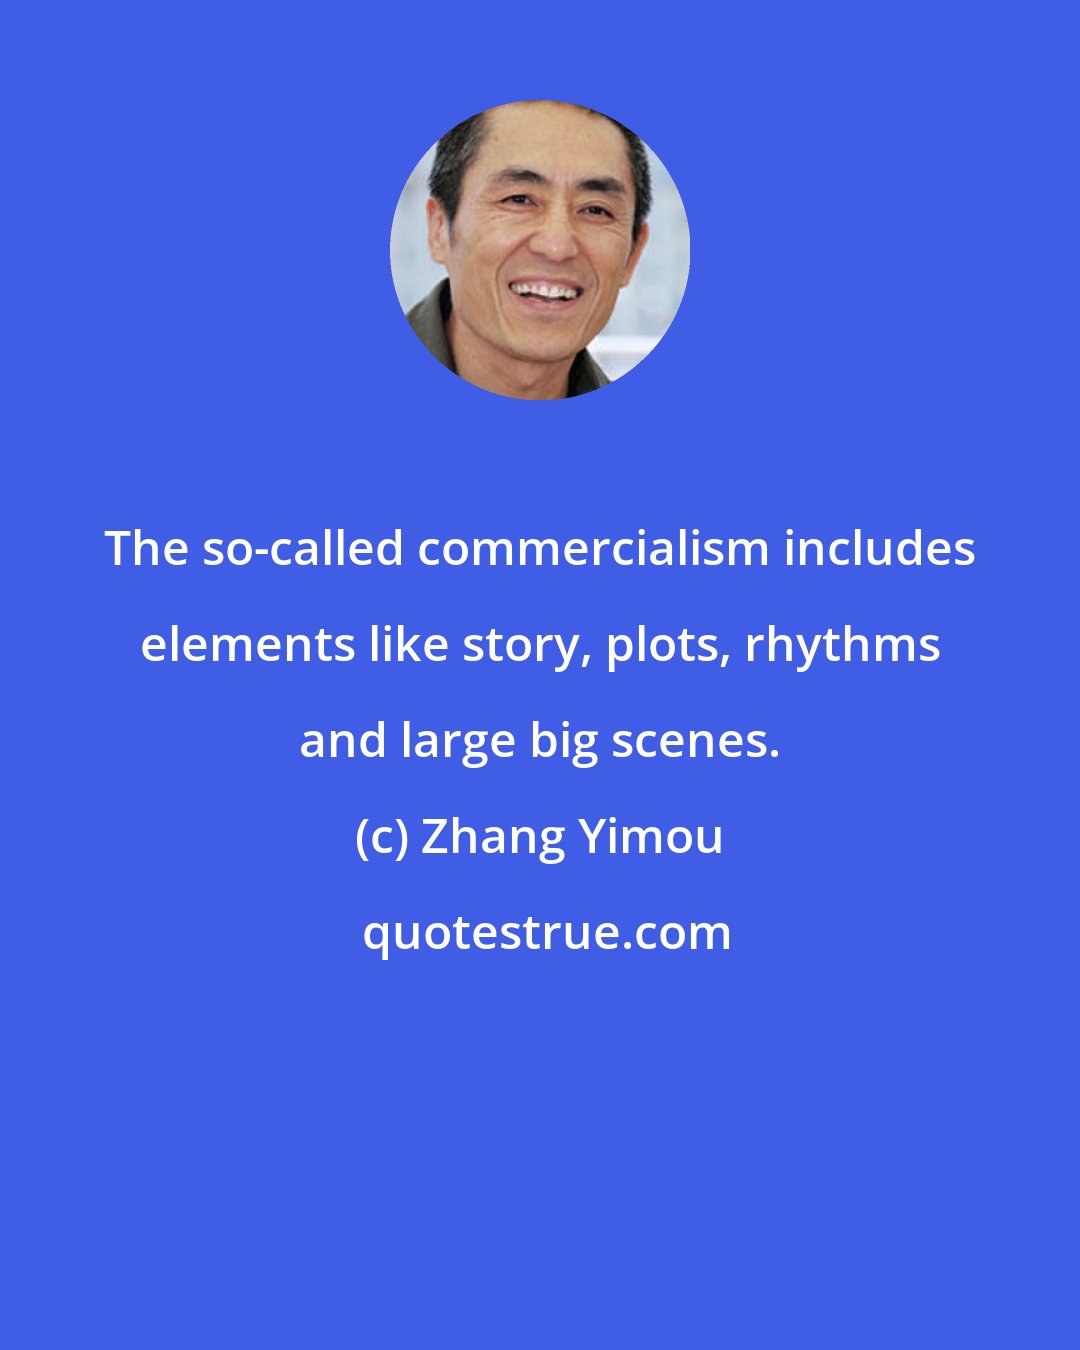 Zhang Yimou: The so-called commercialism includes elements like story, plots, rhythms and large big scenes.